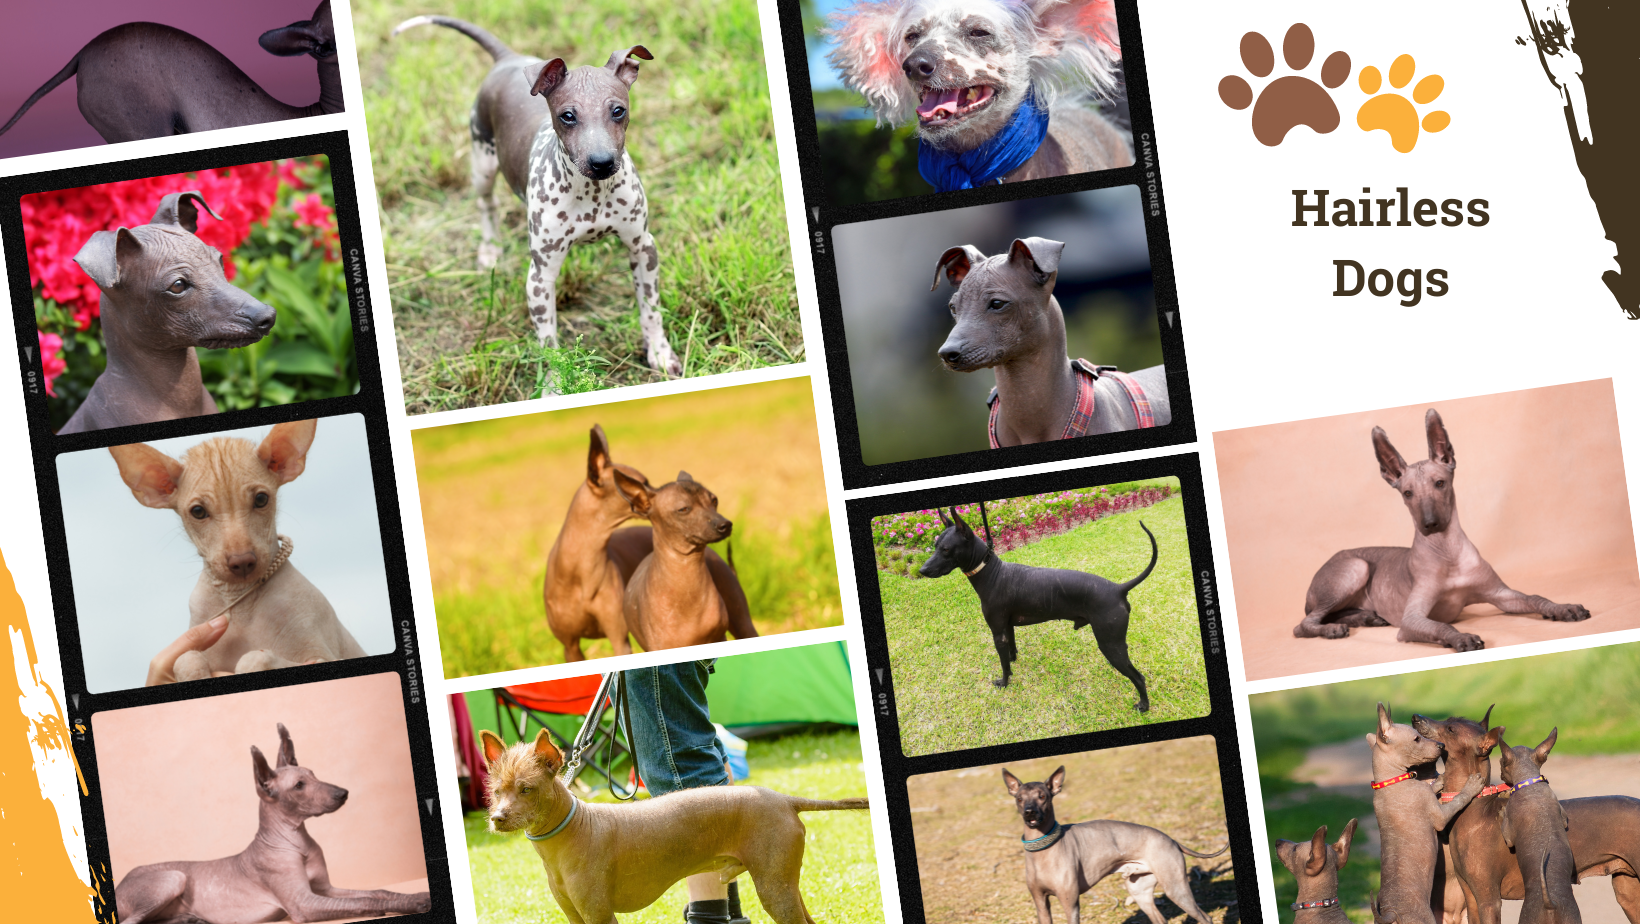 Dog Breed Archive Hairless Dog Breeds